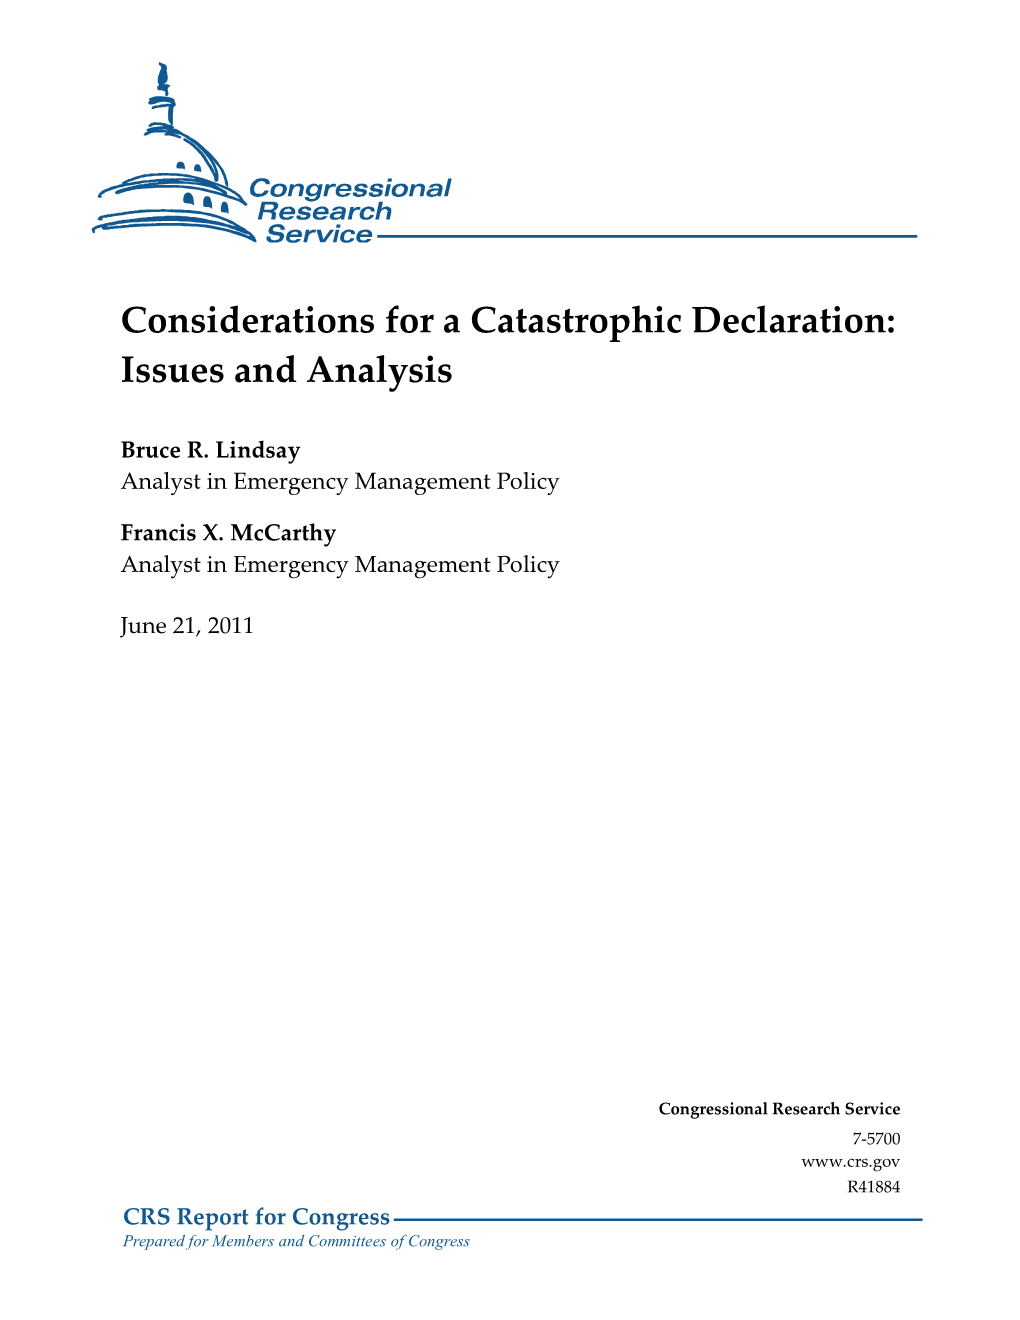 Considerations for a Catastrophic Declaration: Issues and Analysis